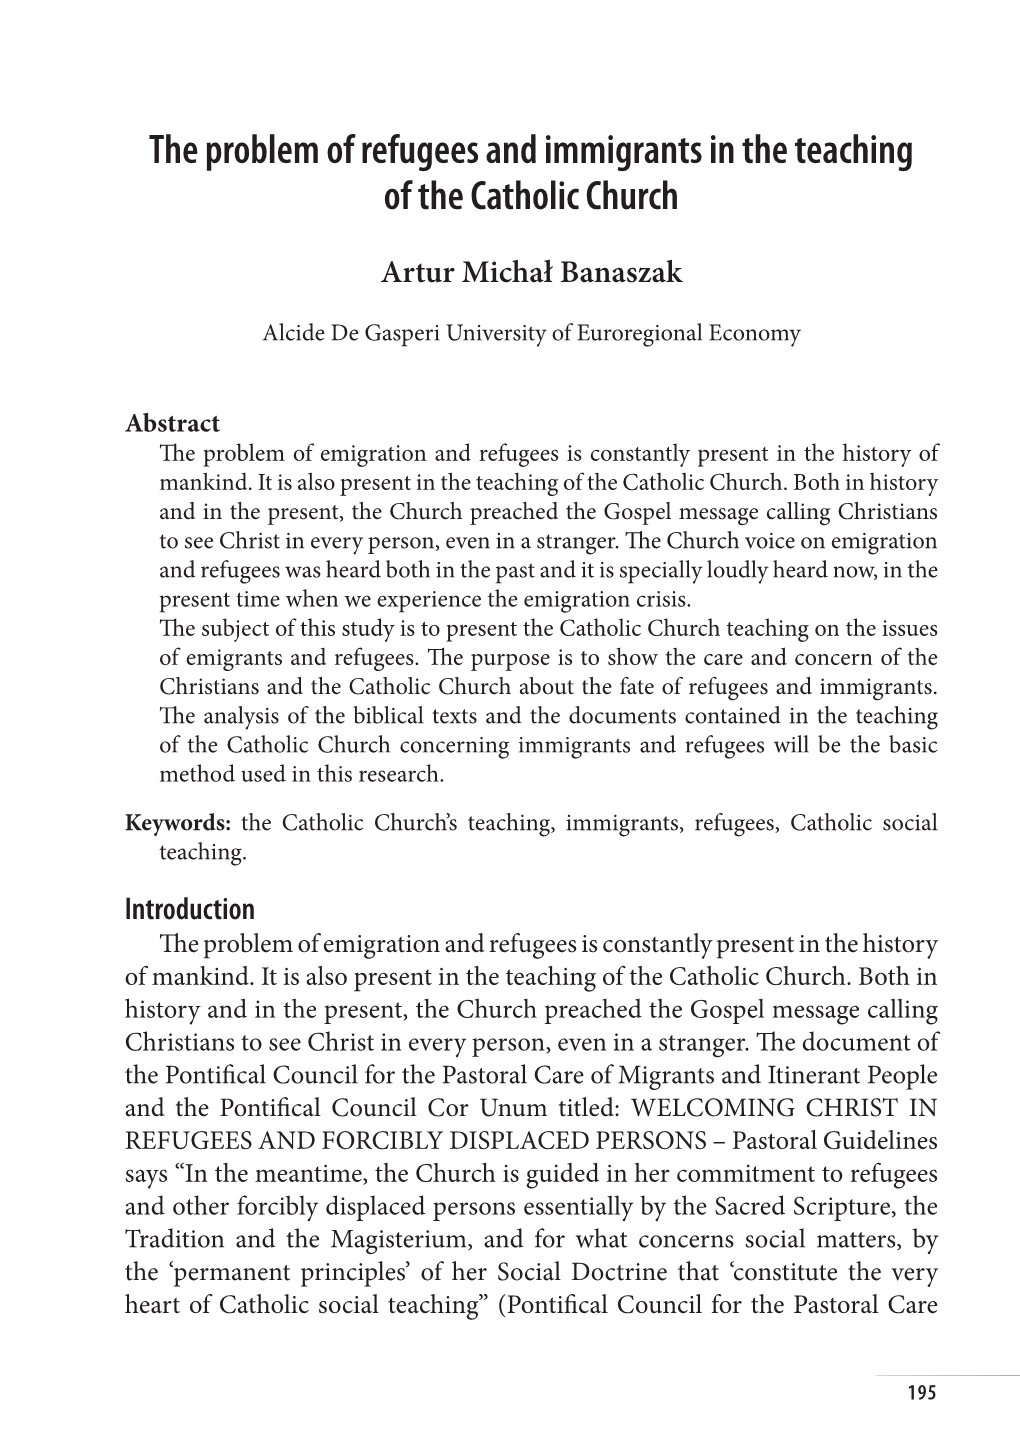 The Problem of Refugees and Immigrants in the Teaching of the Catholic Church